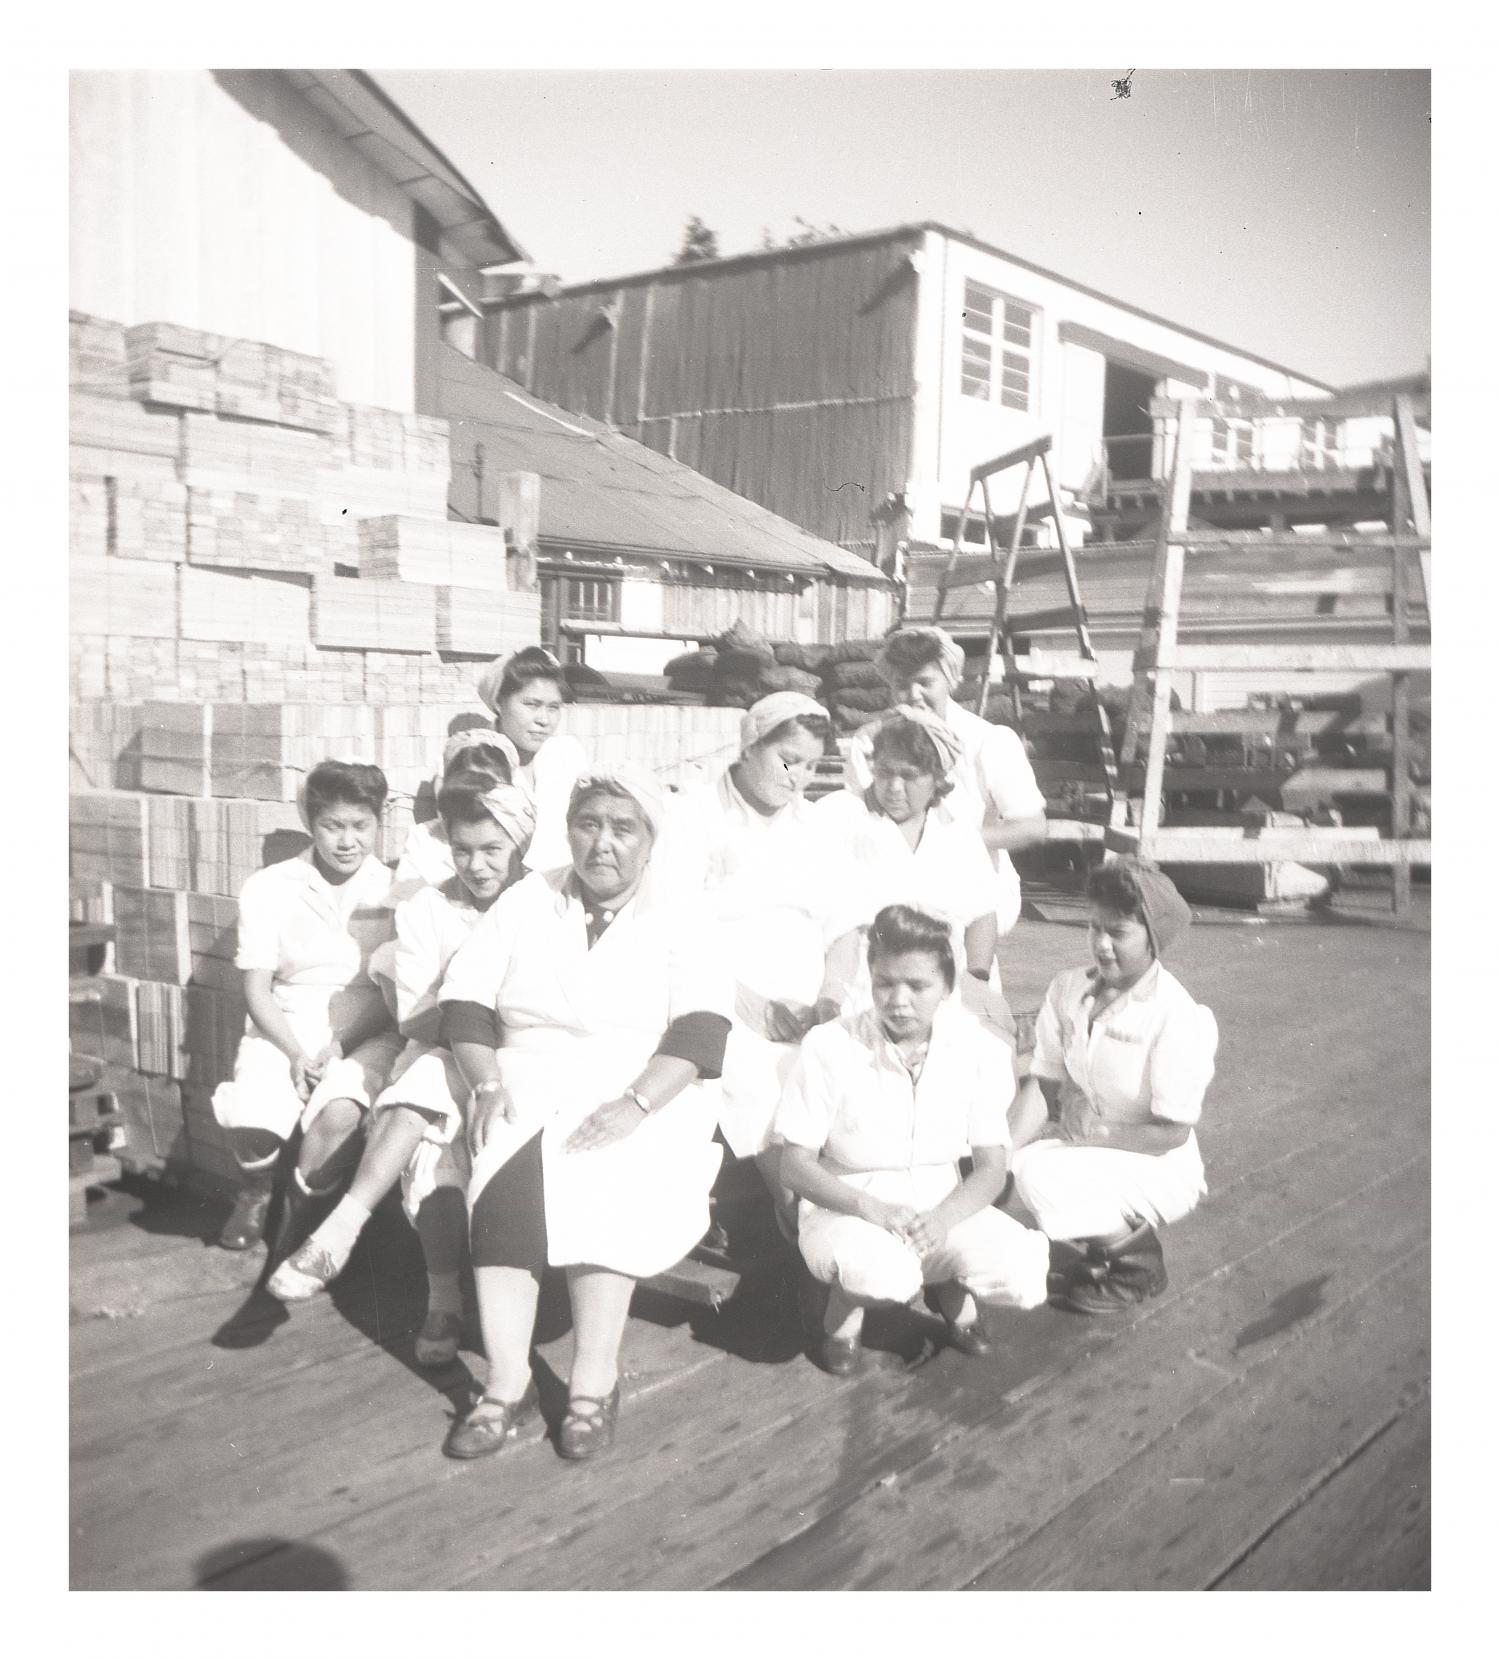 Cannery workers. Brenda Campbell is in the second row behind the lady in the center on the right side looking down. This picture was taken in 1948 in Namu BC. It was part of the Helen Moysiuk collection.